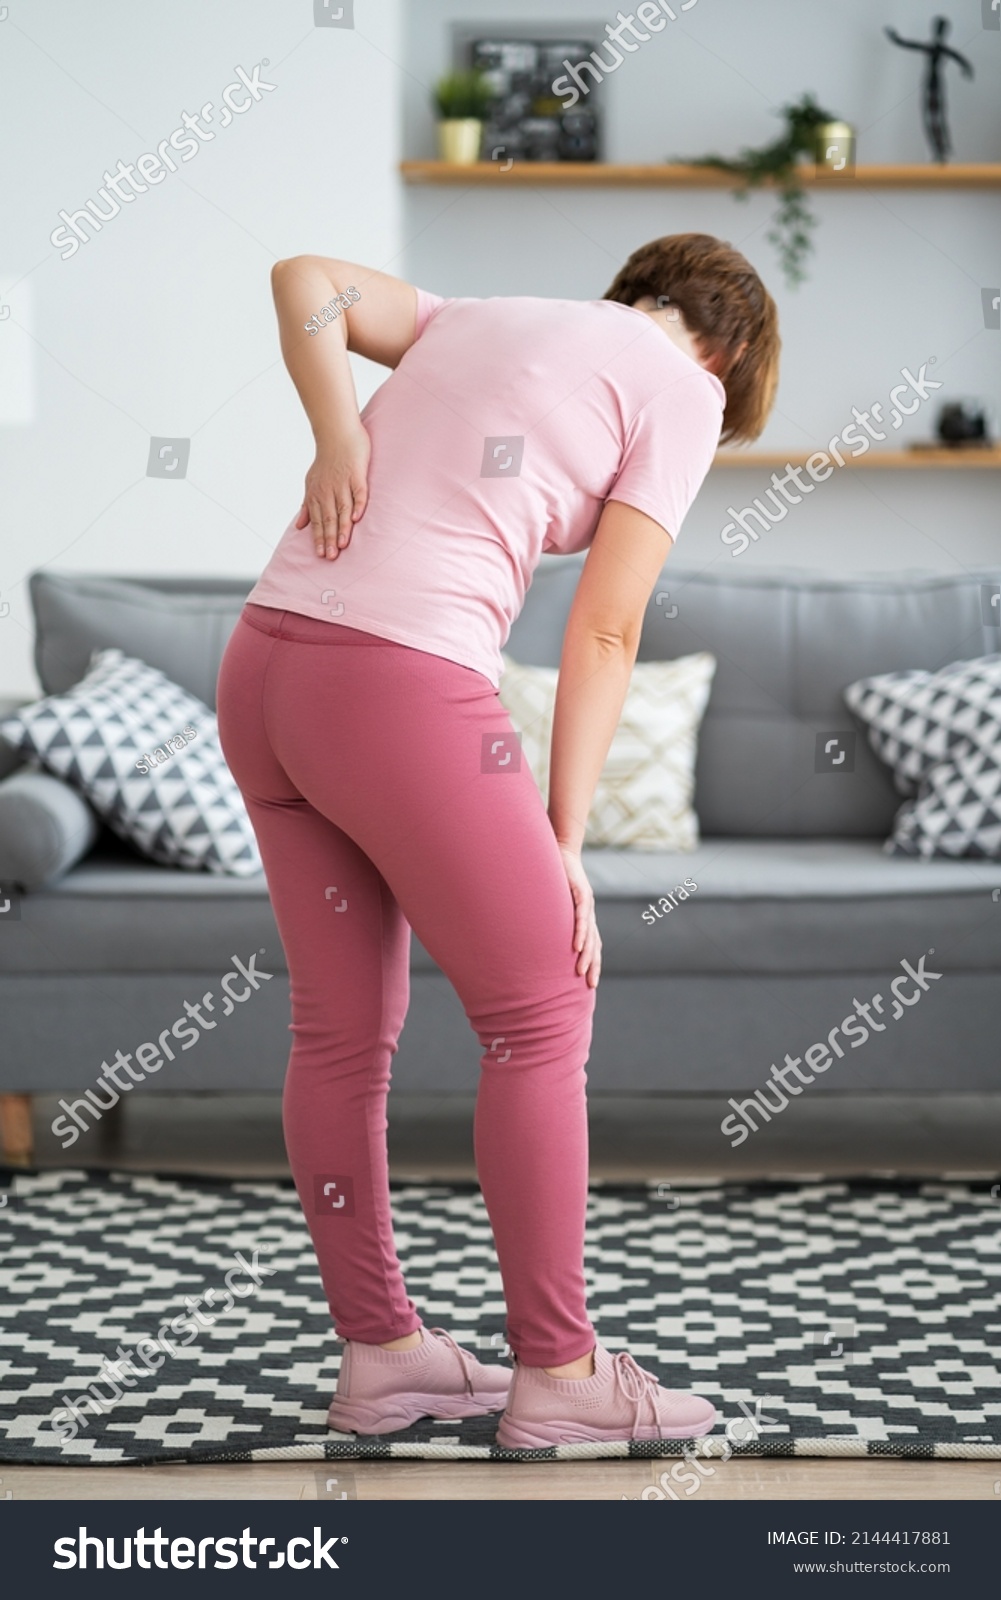 Back Pain Kidney Inflammation Woman Suffering Stock Photo 2144417881